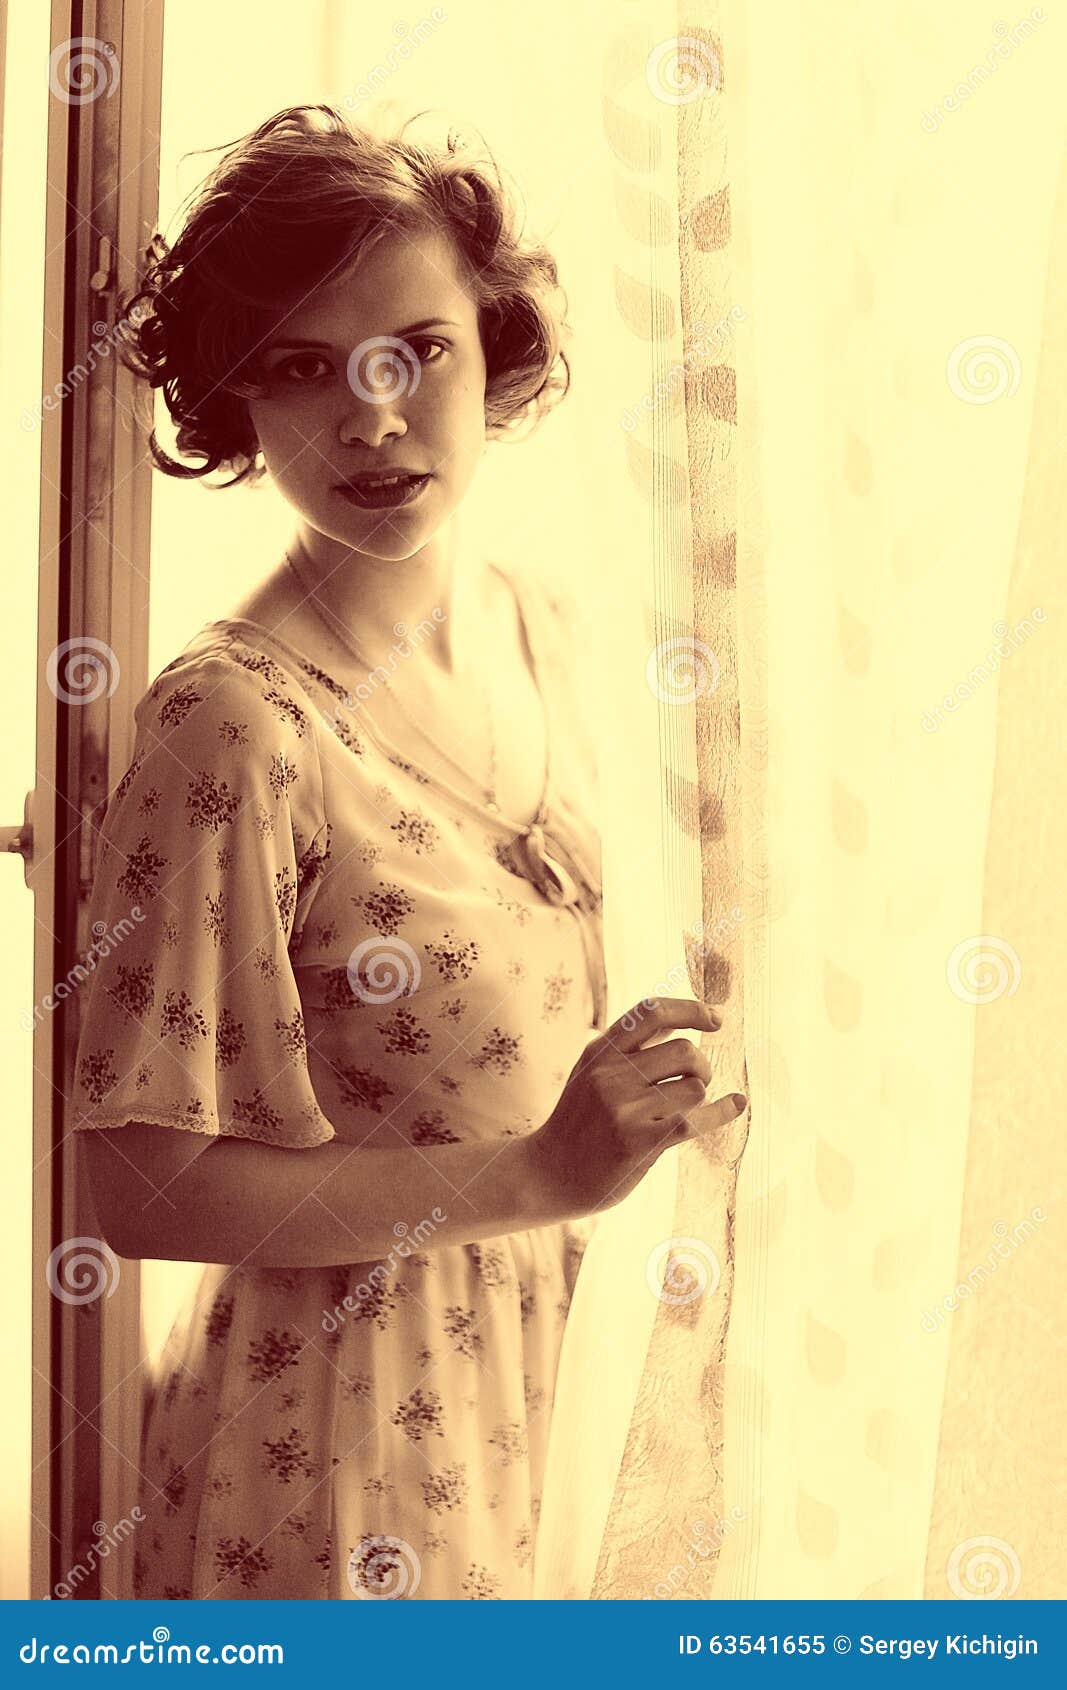 Vintage Portrait Of A Beautiful Girl Stock Photo - Image 